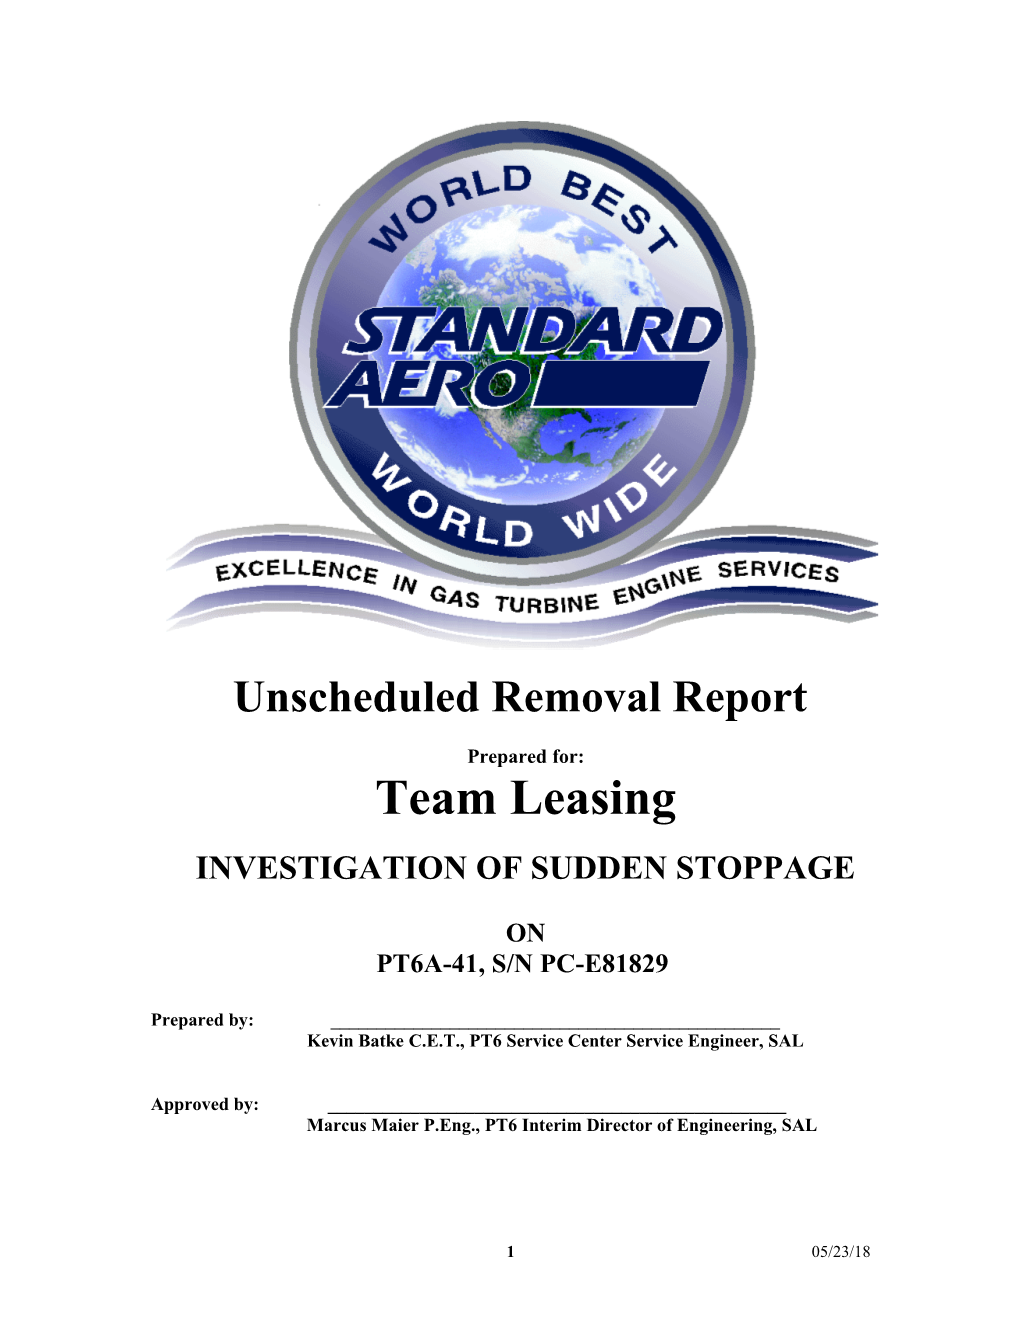 Team Leasing Sudden Stoppage S275492